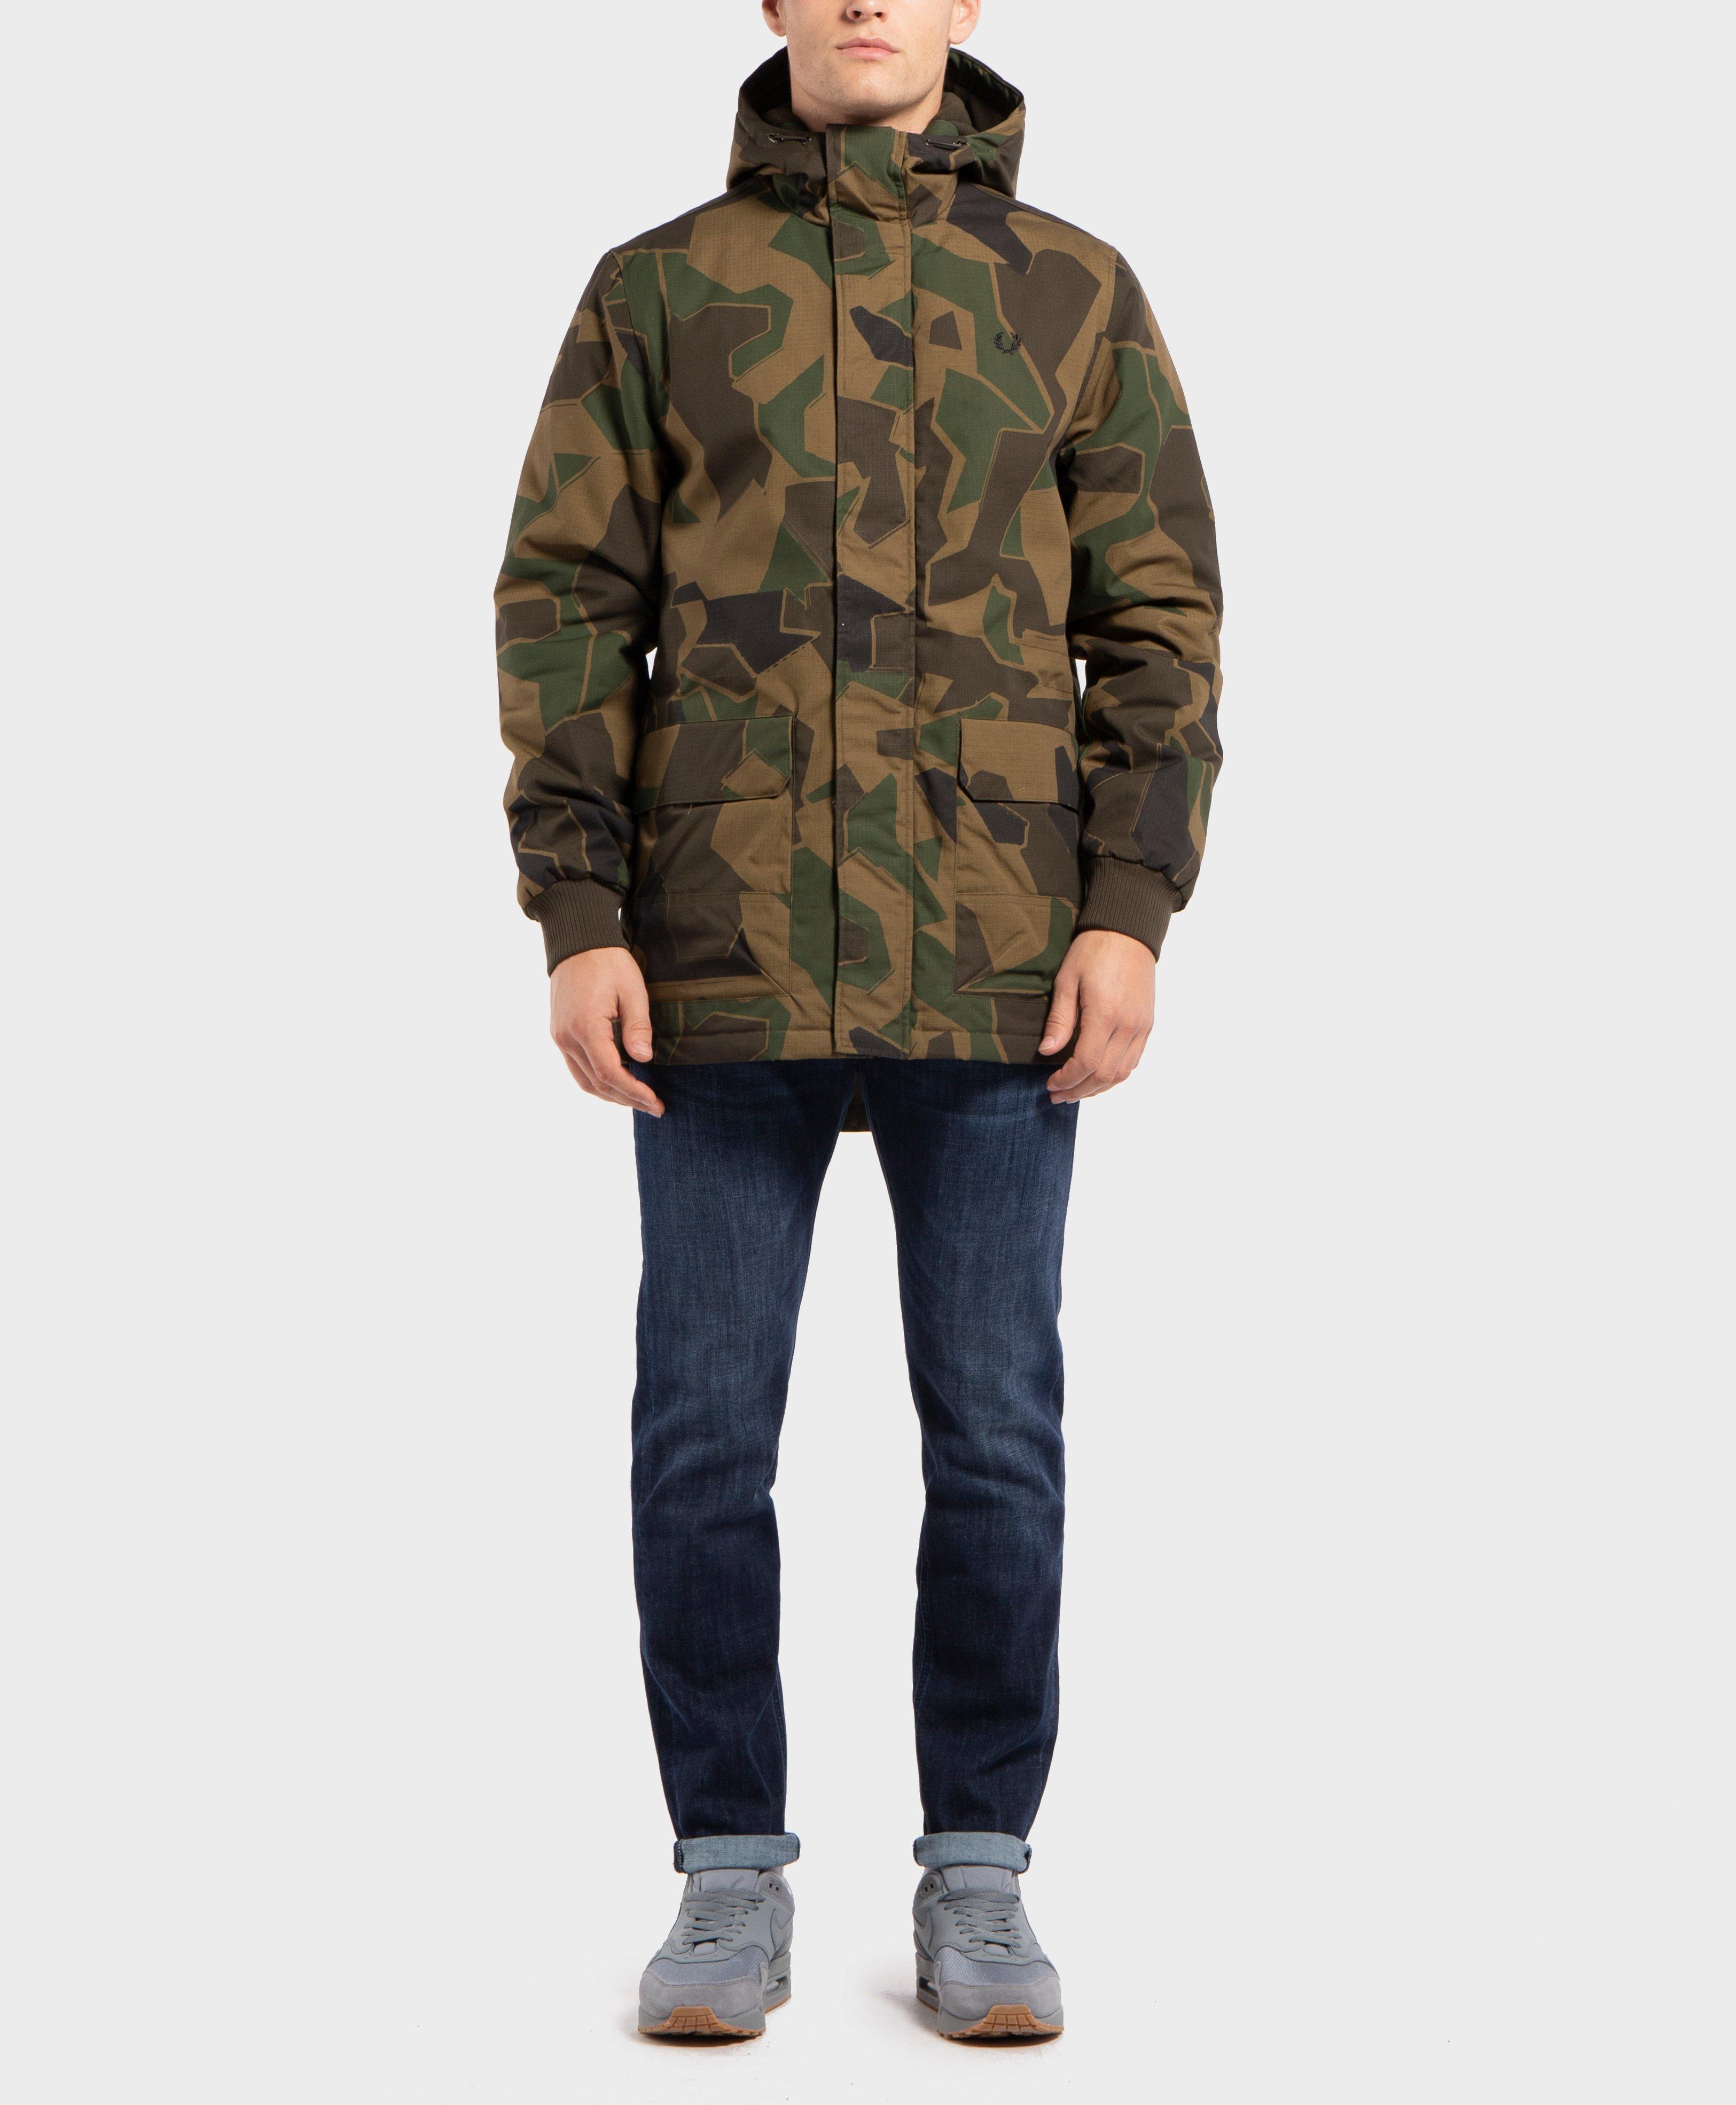 Fred Perry Synthetic X Arktis Stockport Camo Green for Men - Lyst